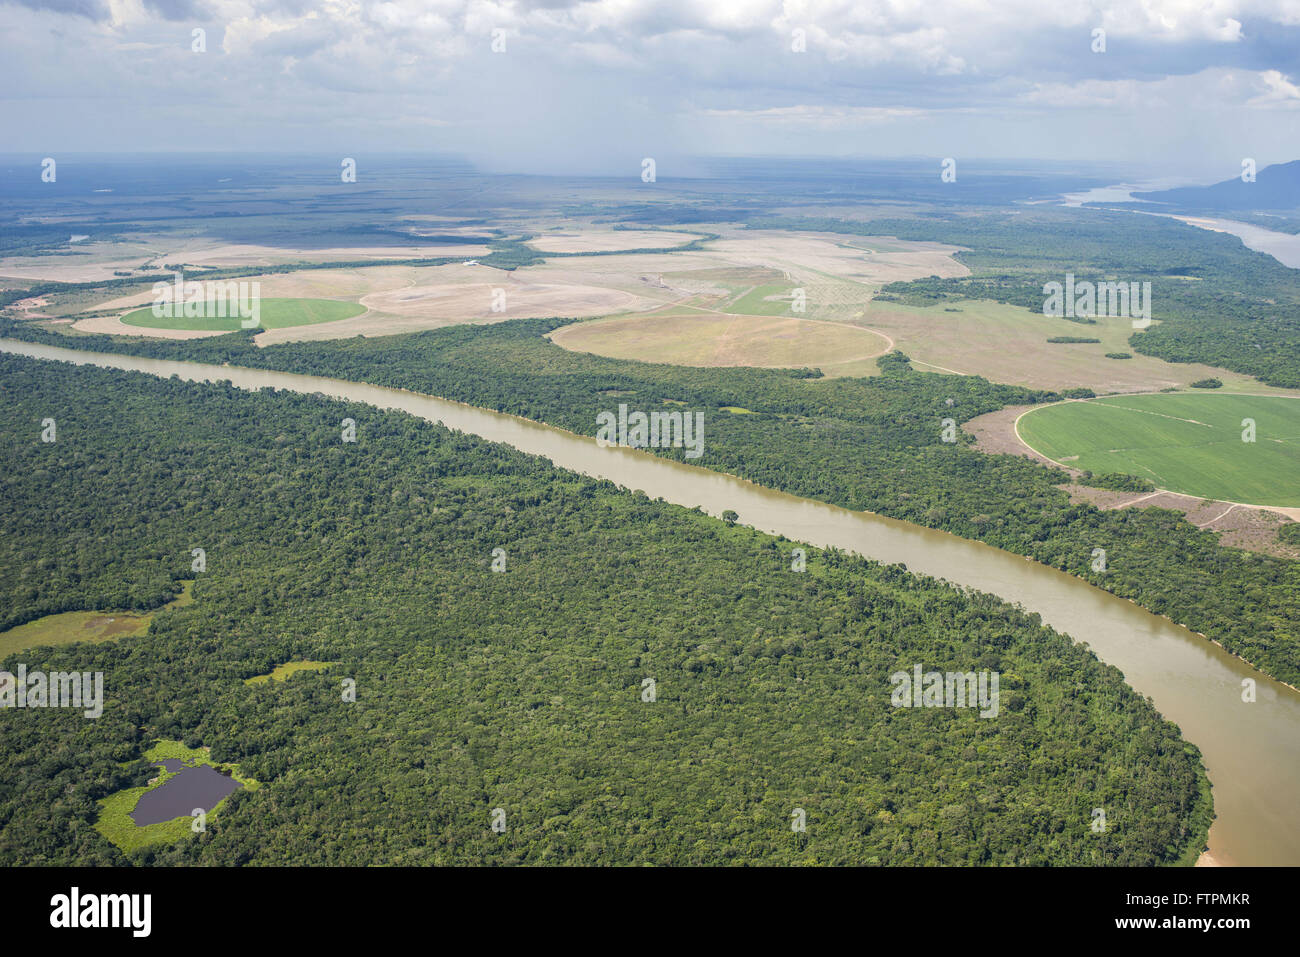 Aerial view of the White River and Amazon forest with areas cleared for agriculture Stock Photo